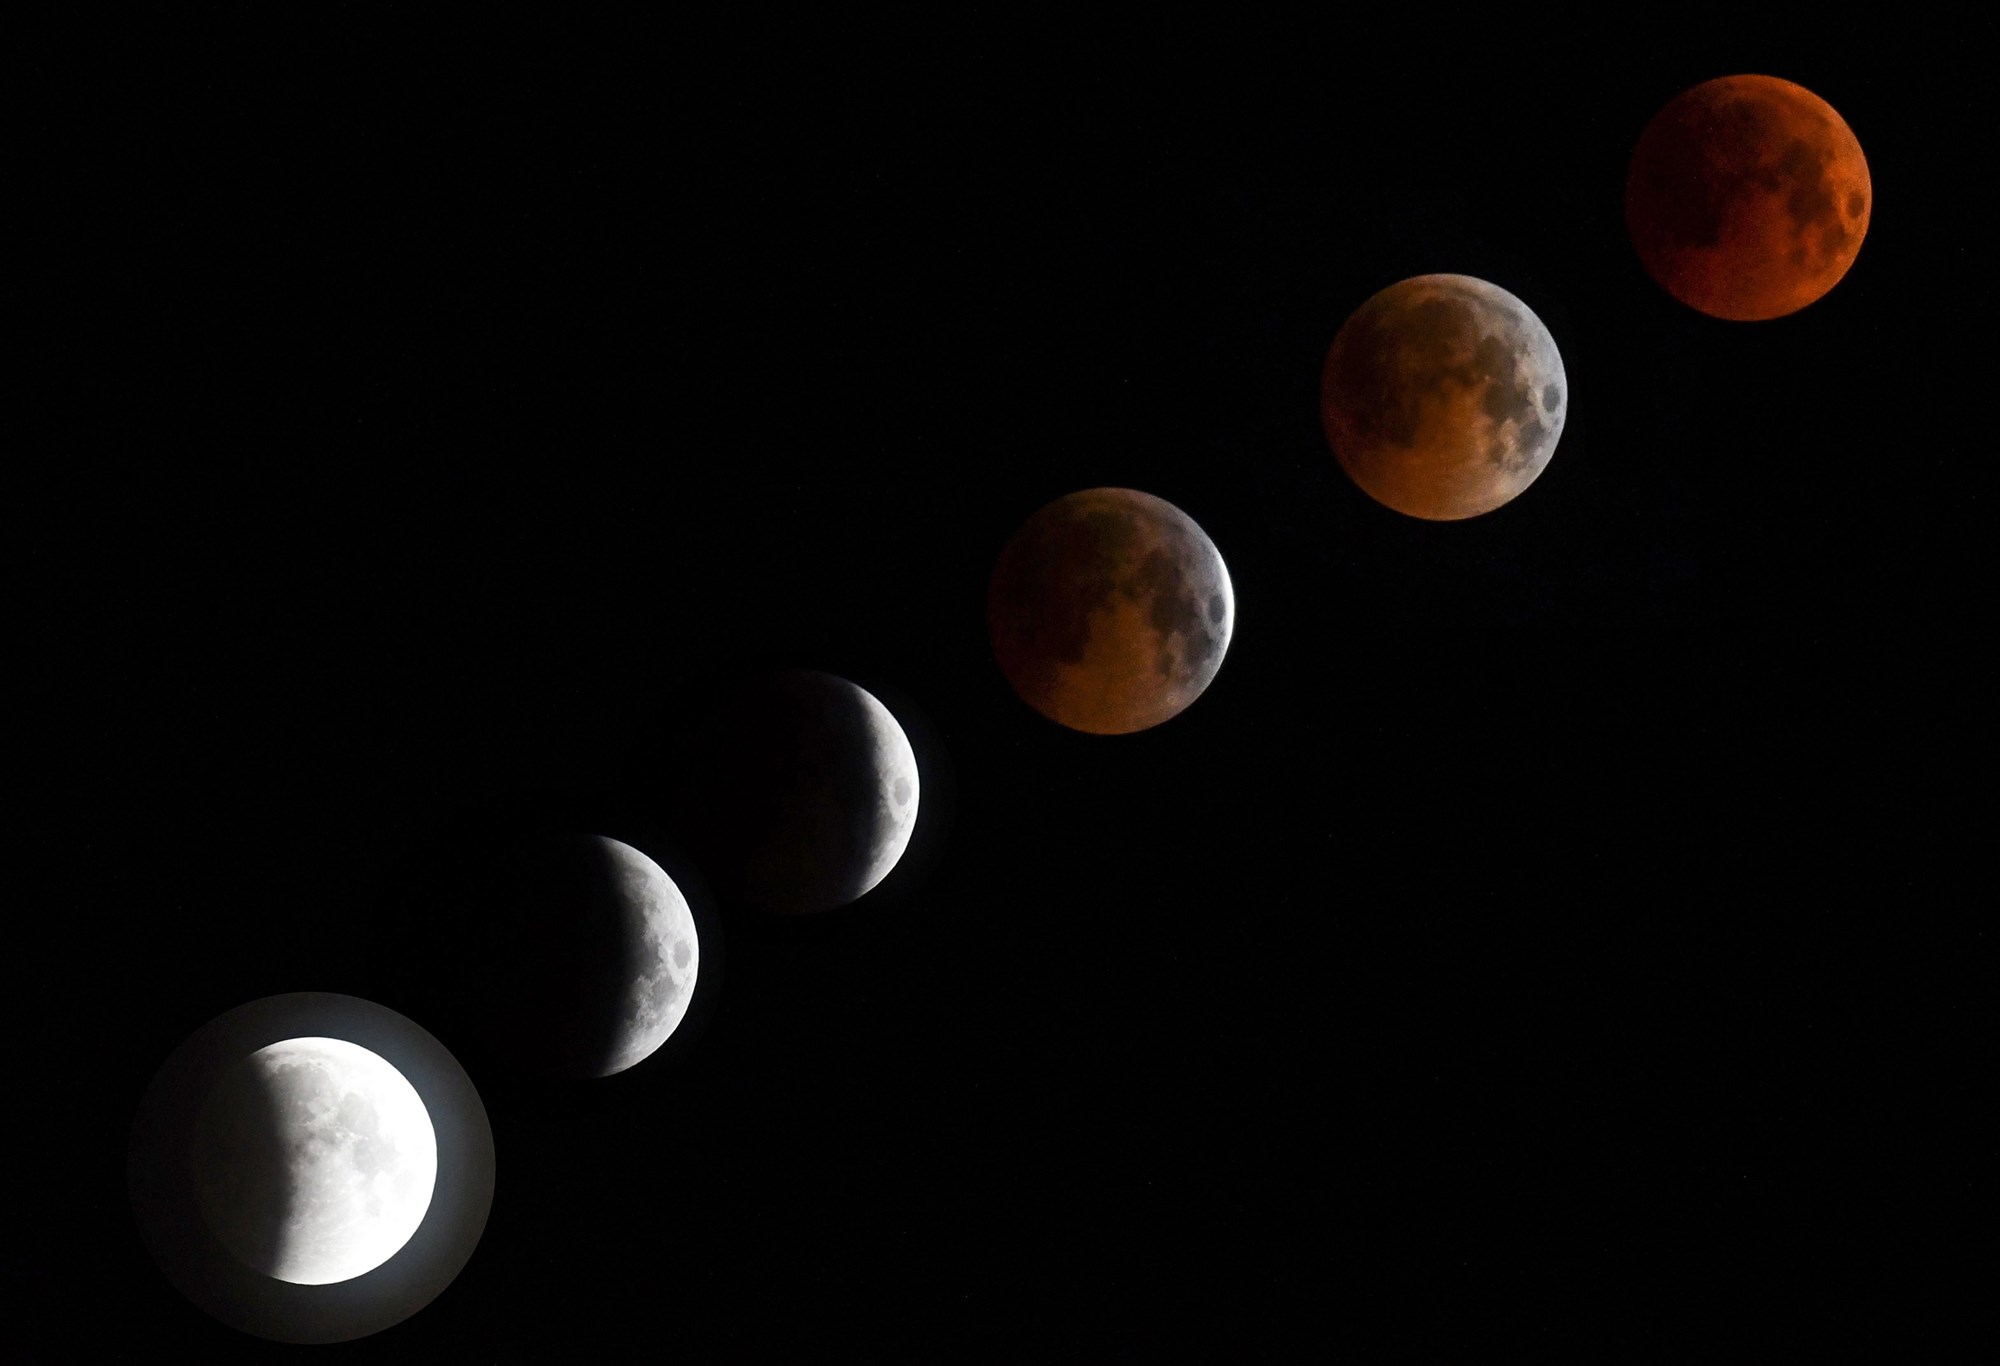 Don't miss 2019's 'super blood wolf moon' starting 10:30 PM EST